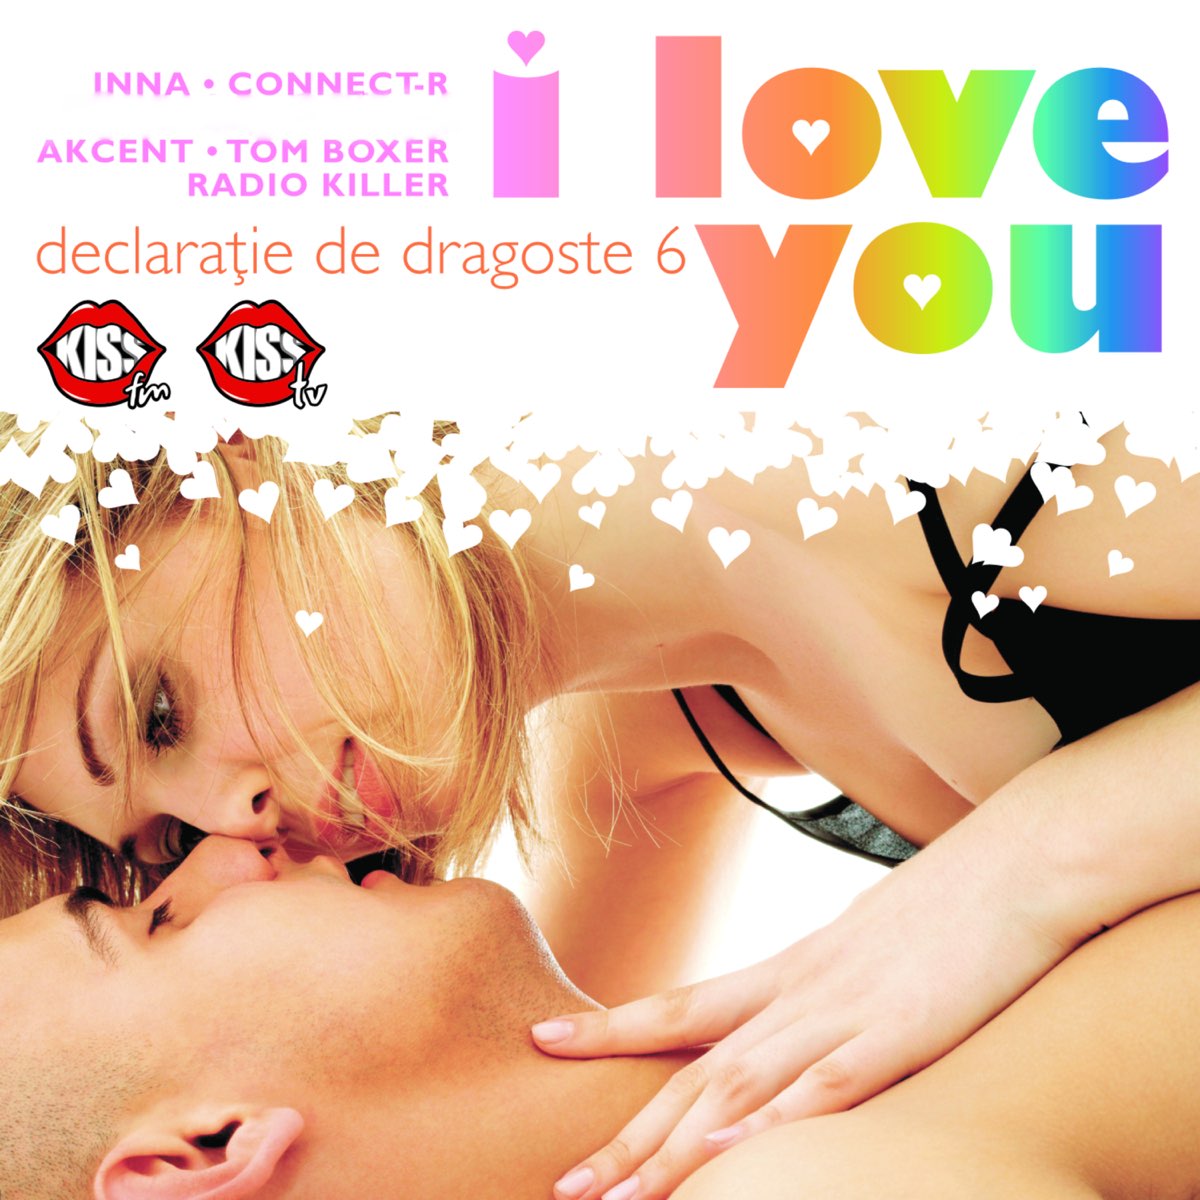 Declaratie de dragoste vol. 6 (I Love You) by Inna, Tom Boxer, Radio Killer,  Akcent, Play & Win, Fly Project, Dream City, Connect-R, The Marker, Tina G  & Alex on Apple Music